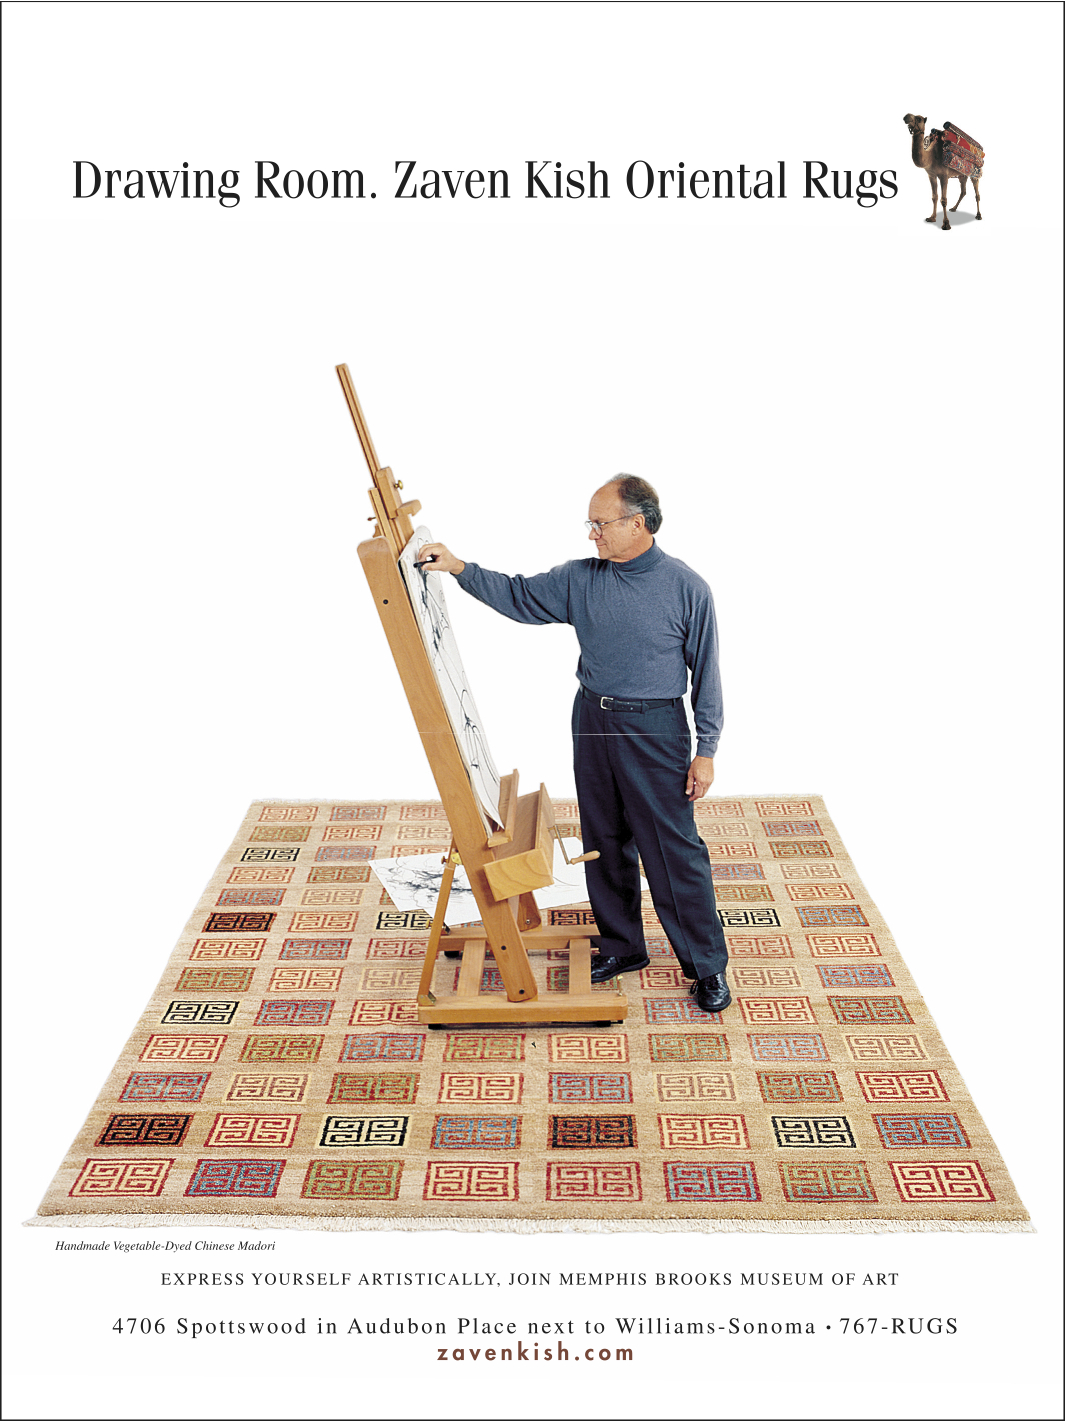  Zaven Kish Oriental Rugs full-page magazine ad 1  Branding creative, copywriting and design by Chuck Mitchell  Photograph by API Photographers, Memphis  © Chuck Mitchell  All rights reserved. 